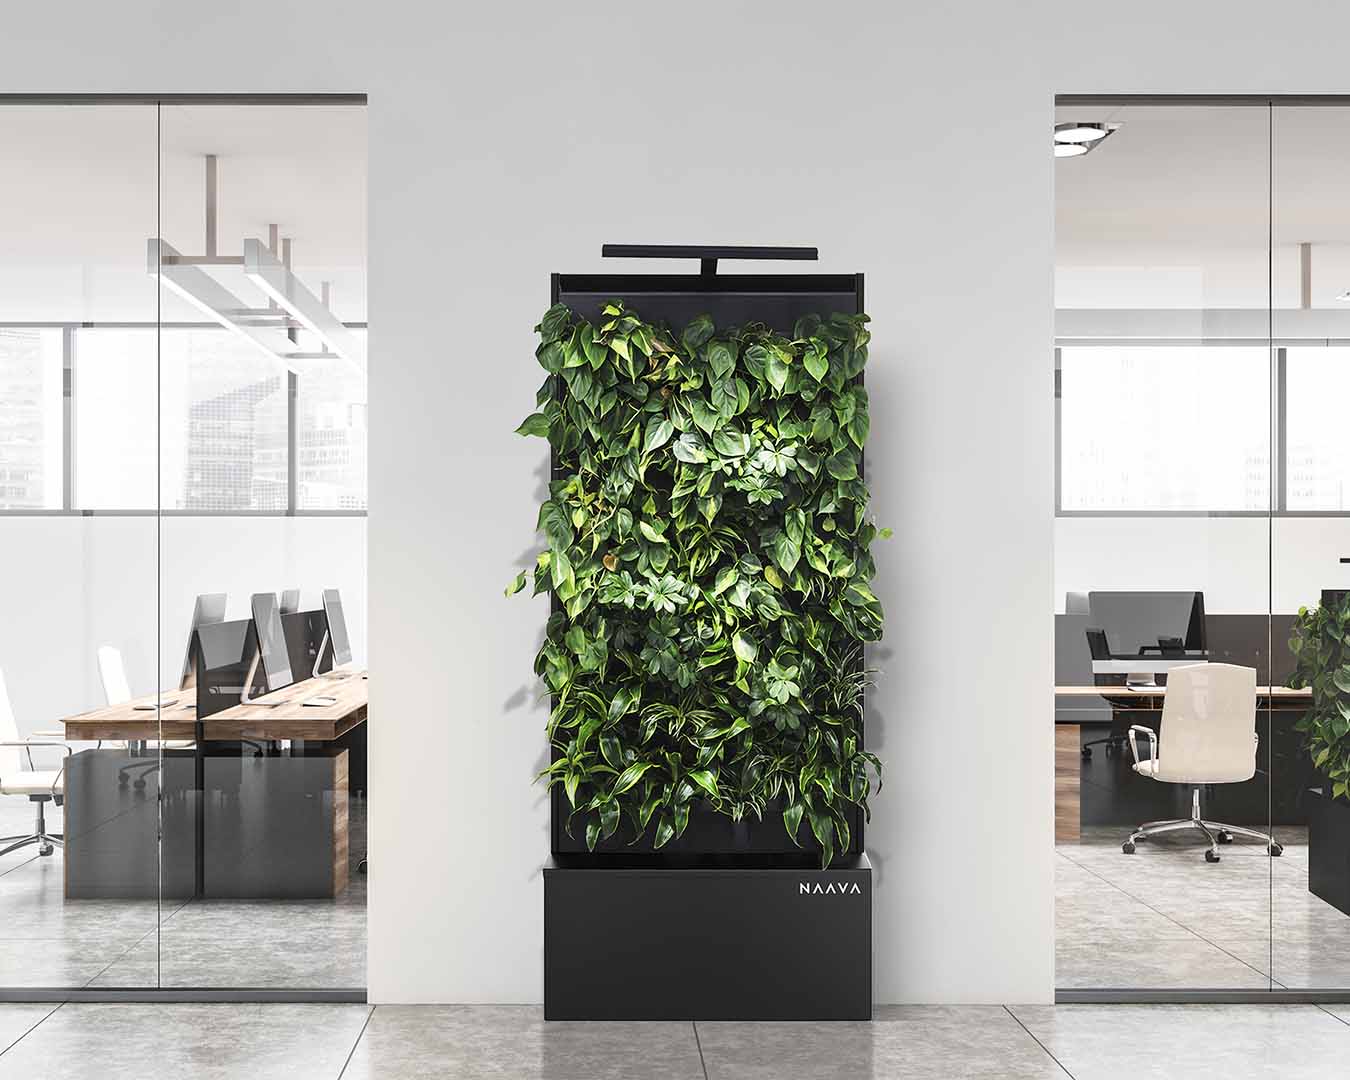 Naava green wall with air purifier